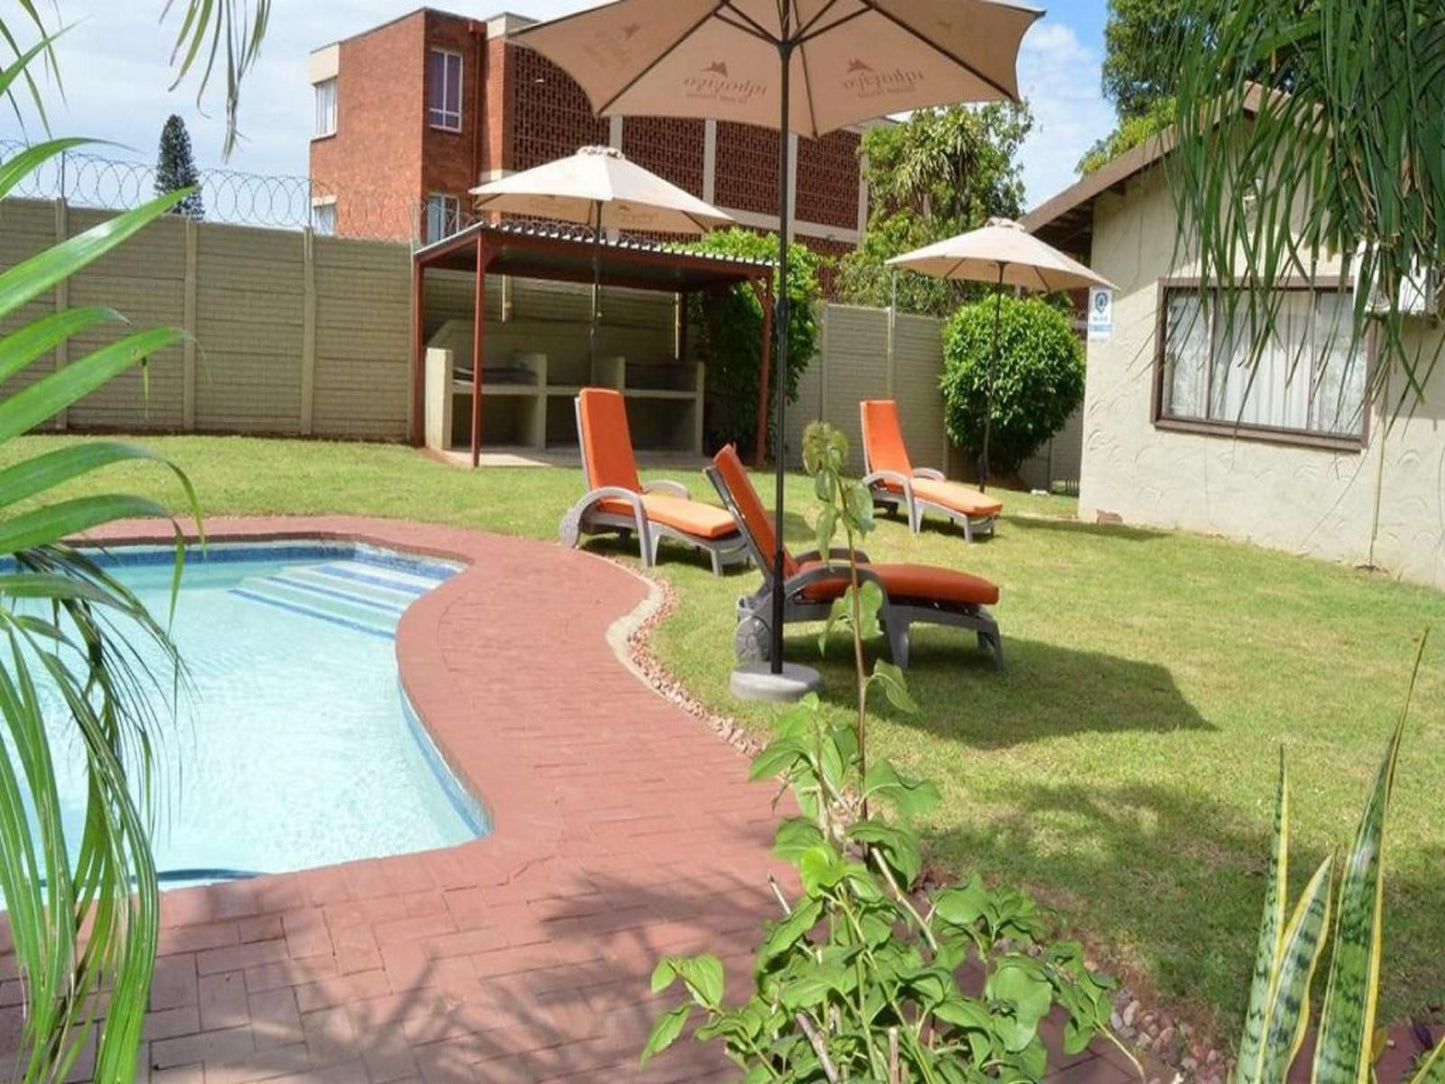 Iqhayiya Guest House Montclair Durban Kwazulu Natal South Africa House, Building, Architecture, Garden, Nature, Plant, Swimming Pool